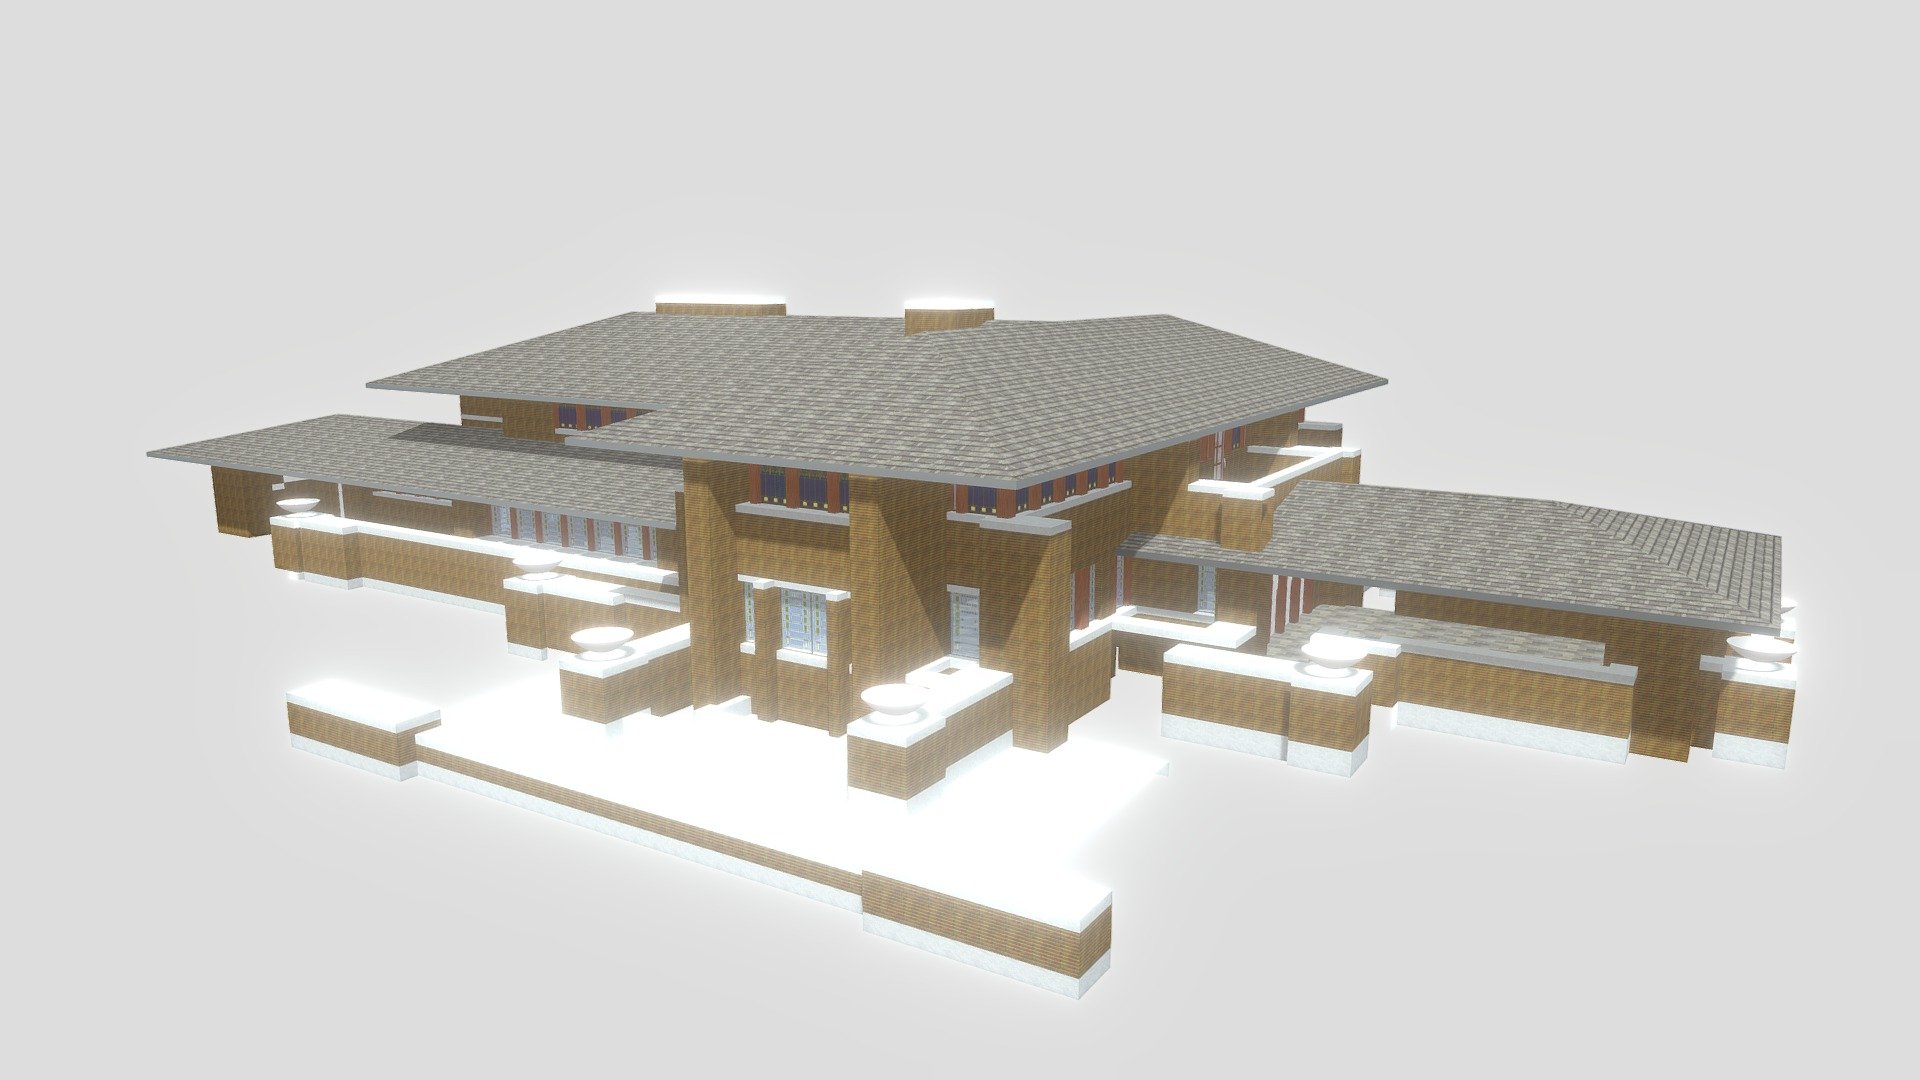 http://www.martinhouse.org/ - frank lloyd wright martin house - 3D model by Stacked 3d model